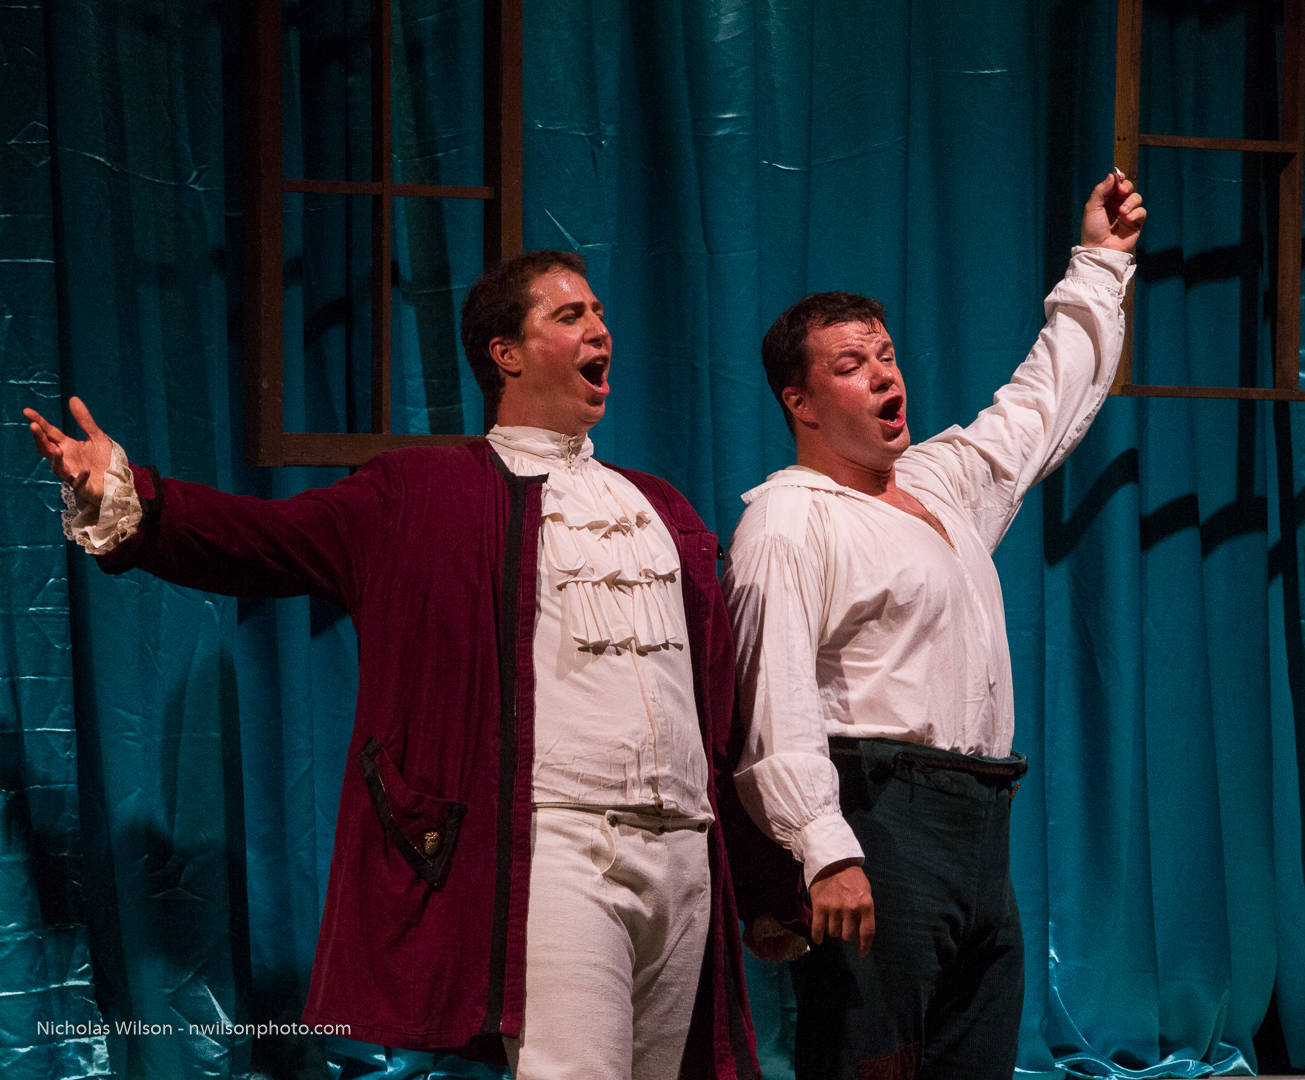 Count Almaviva (Chester Pidduck) and Figaro the barber (Eugene Brancoveanu) in The Barber of Seville